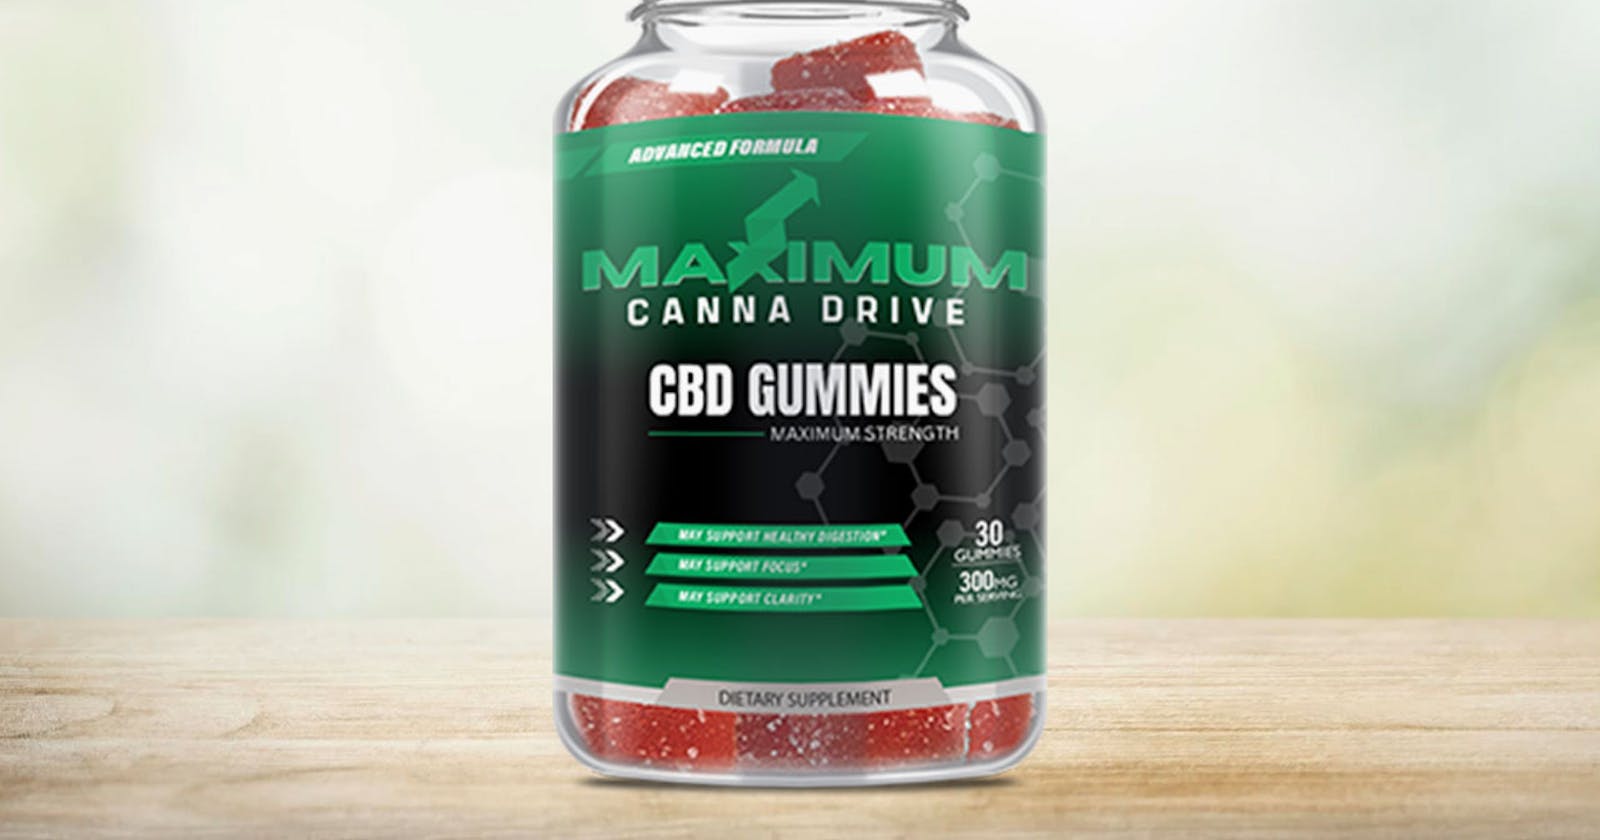 Maximum Canna Drive CBD Gummies - Reviews: Increase Your Sexual Performance, Is It Worth Buying?